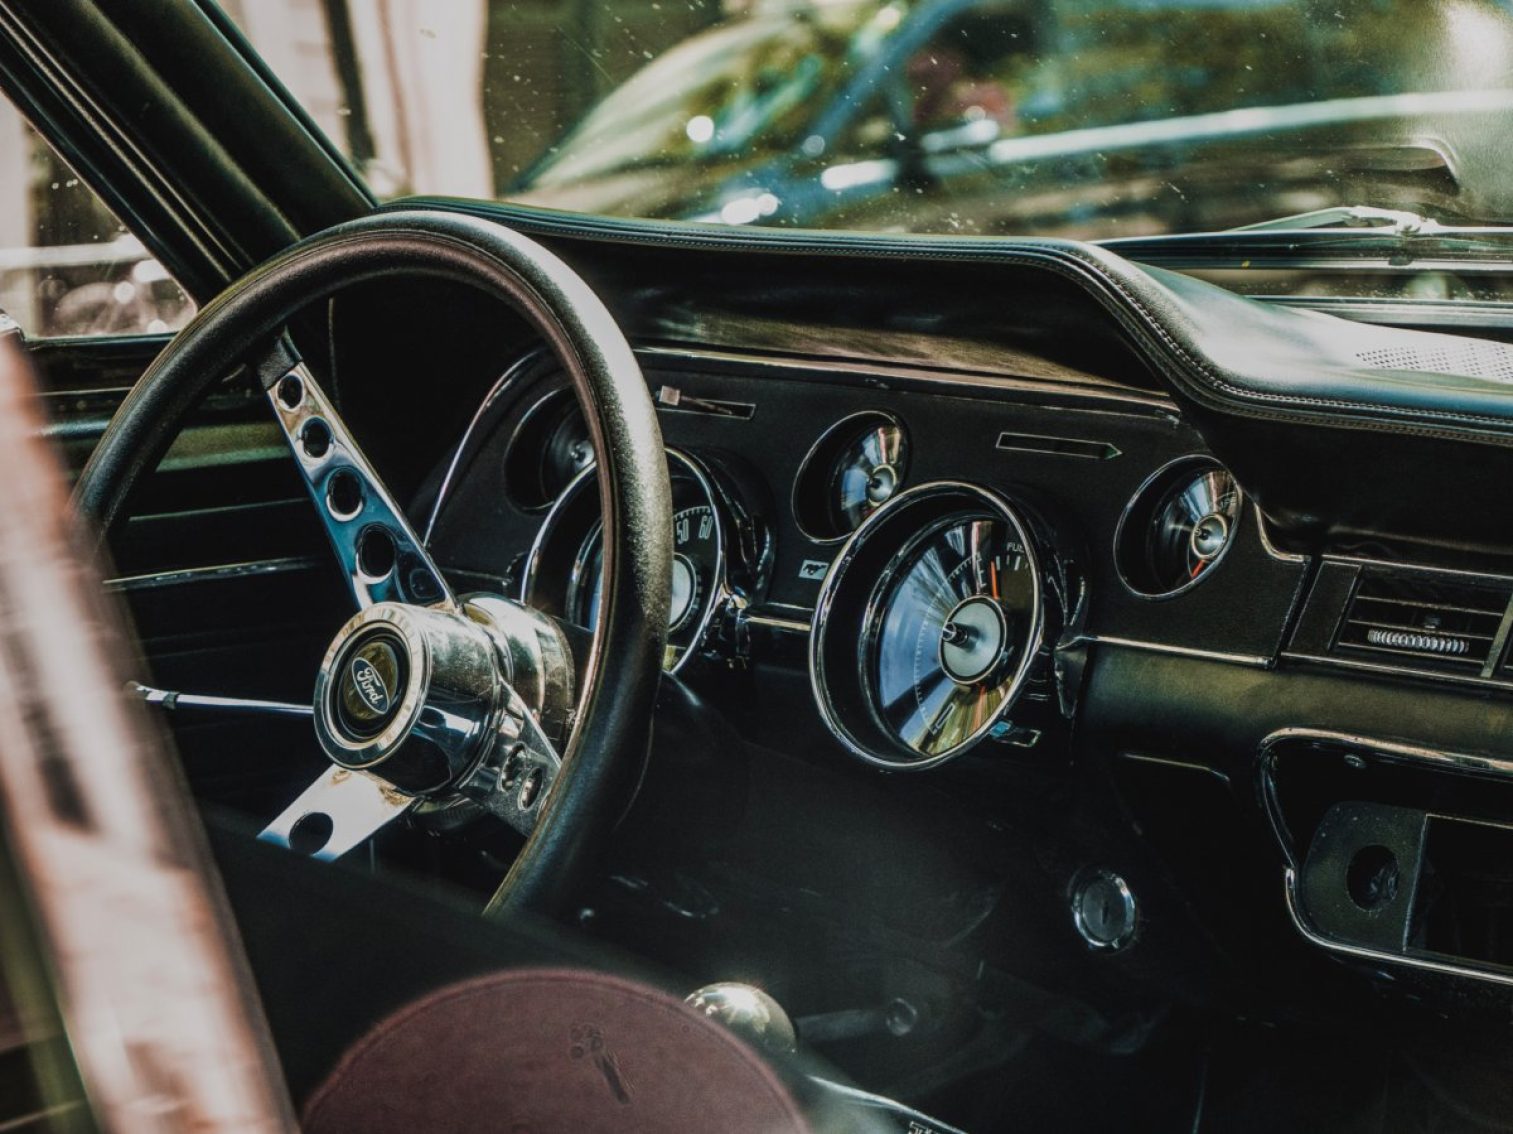 Ford vintage car with black interior